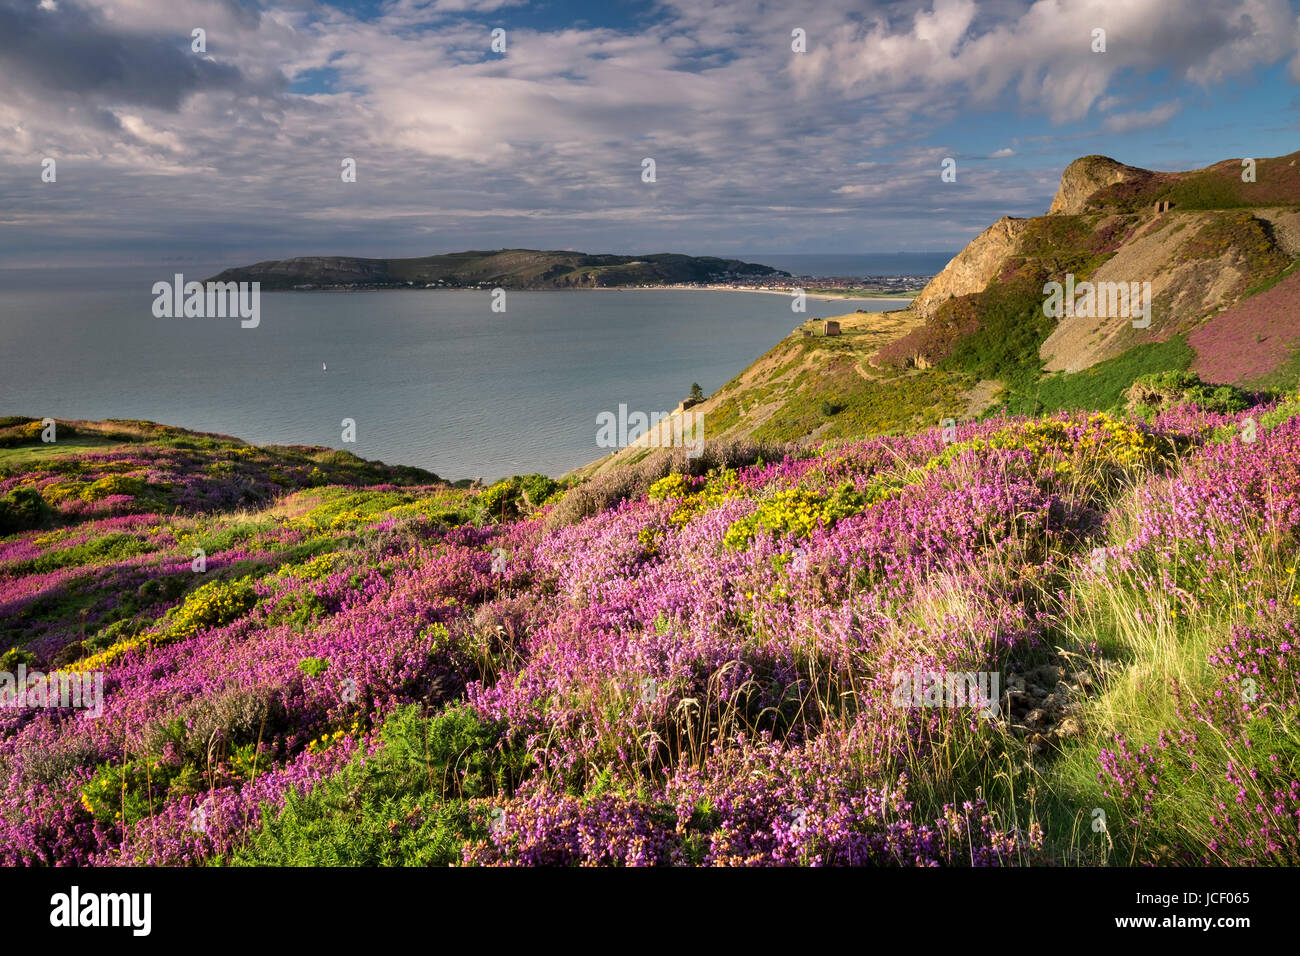 The Great Orme & Llandudno from Conwy Mountain in Summer, Conwy, North Wales, UK Stock Photo